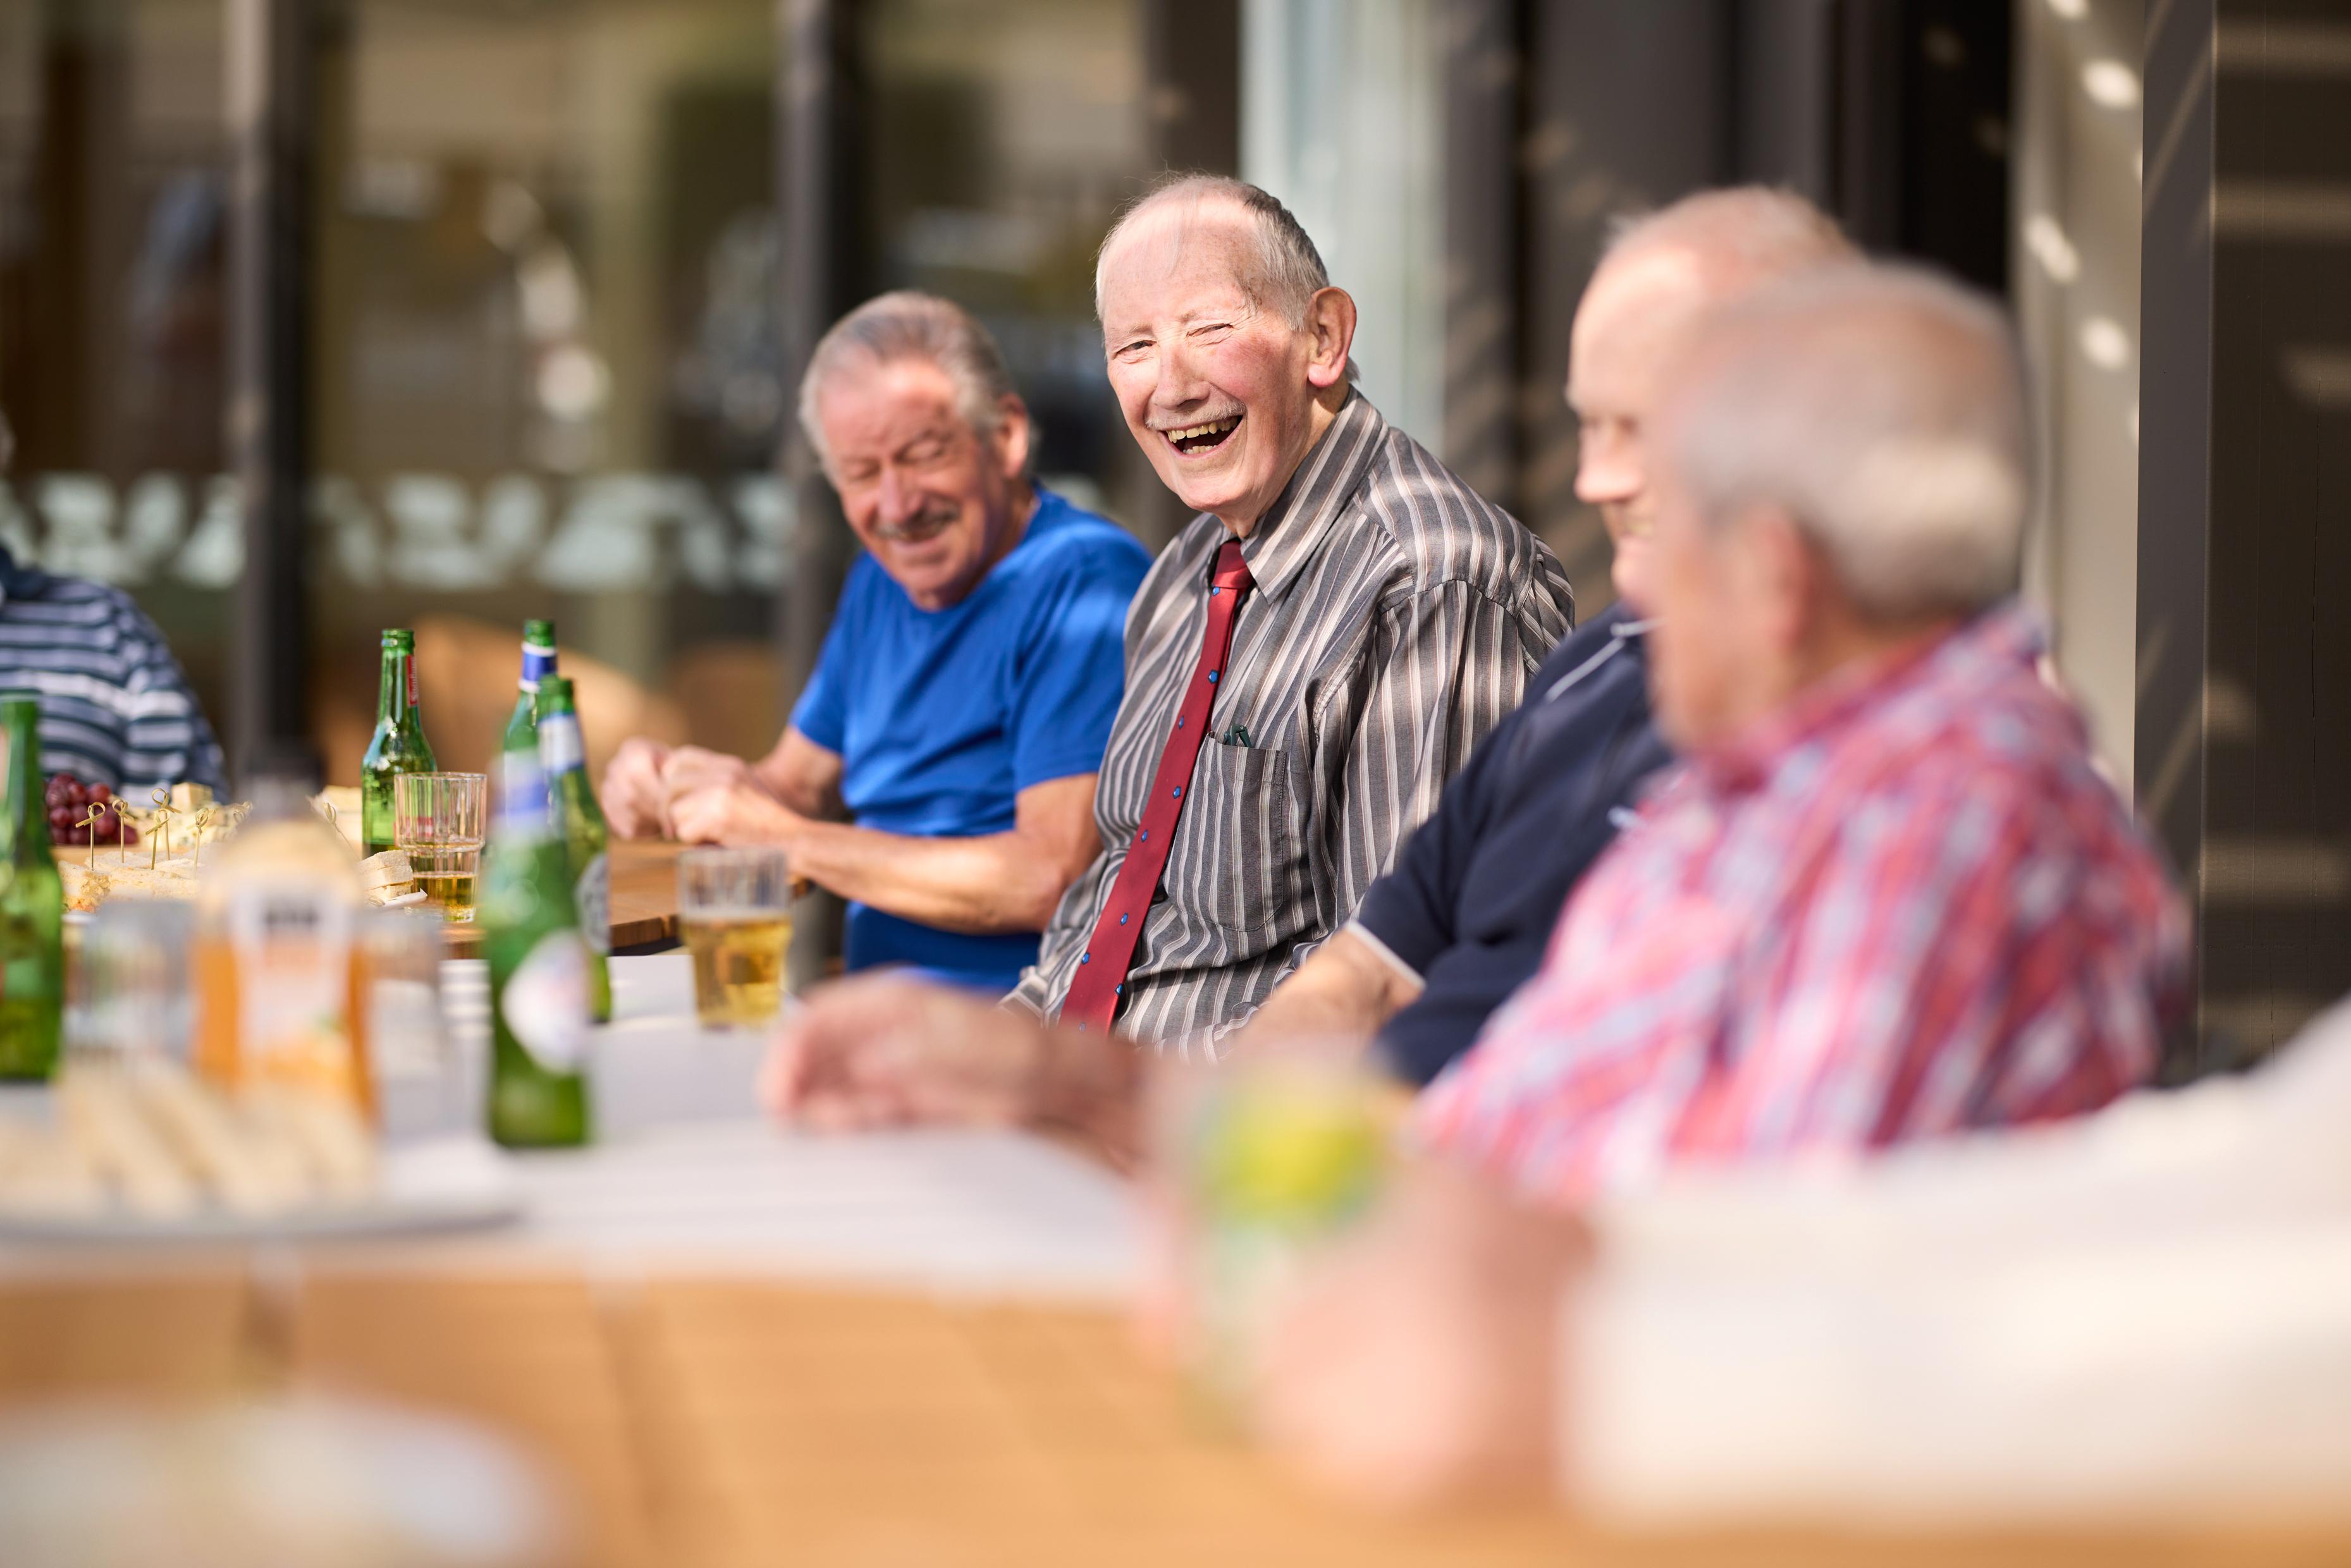 Edgewater Village residents having a laugh at the monthly meet up